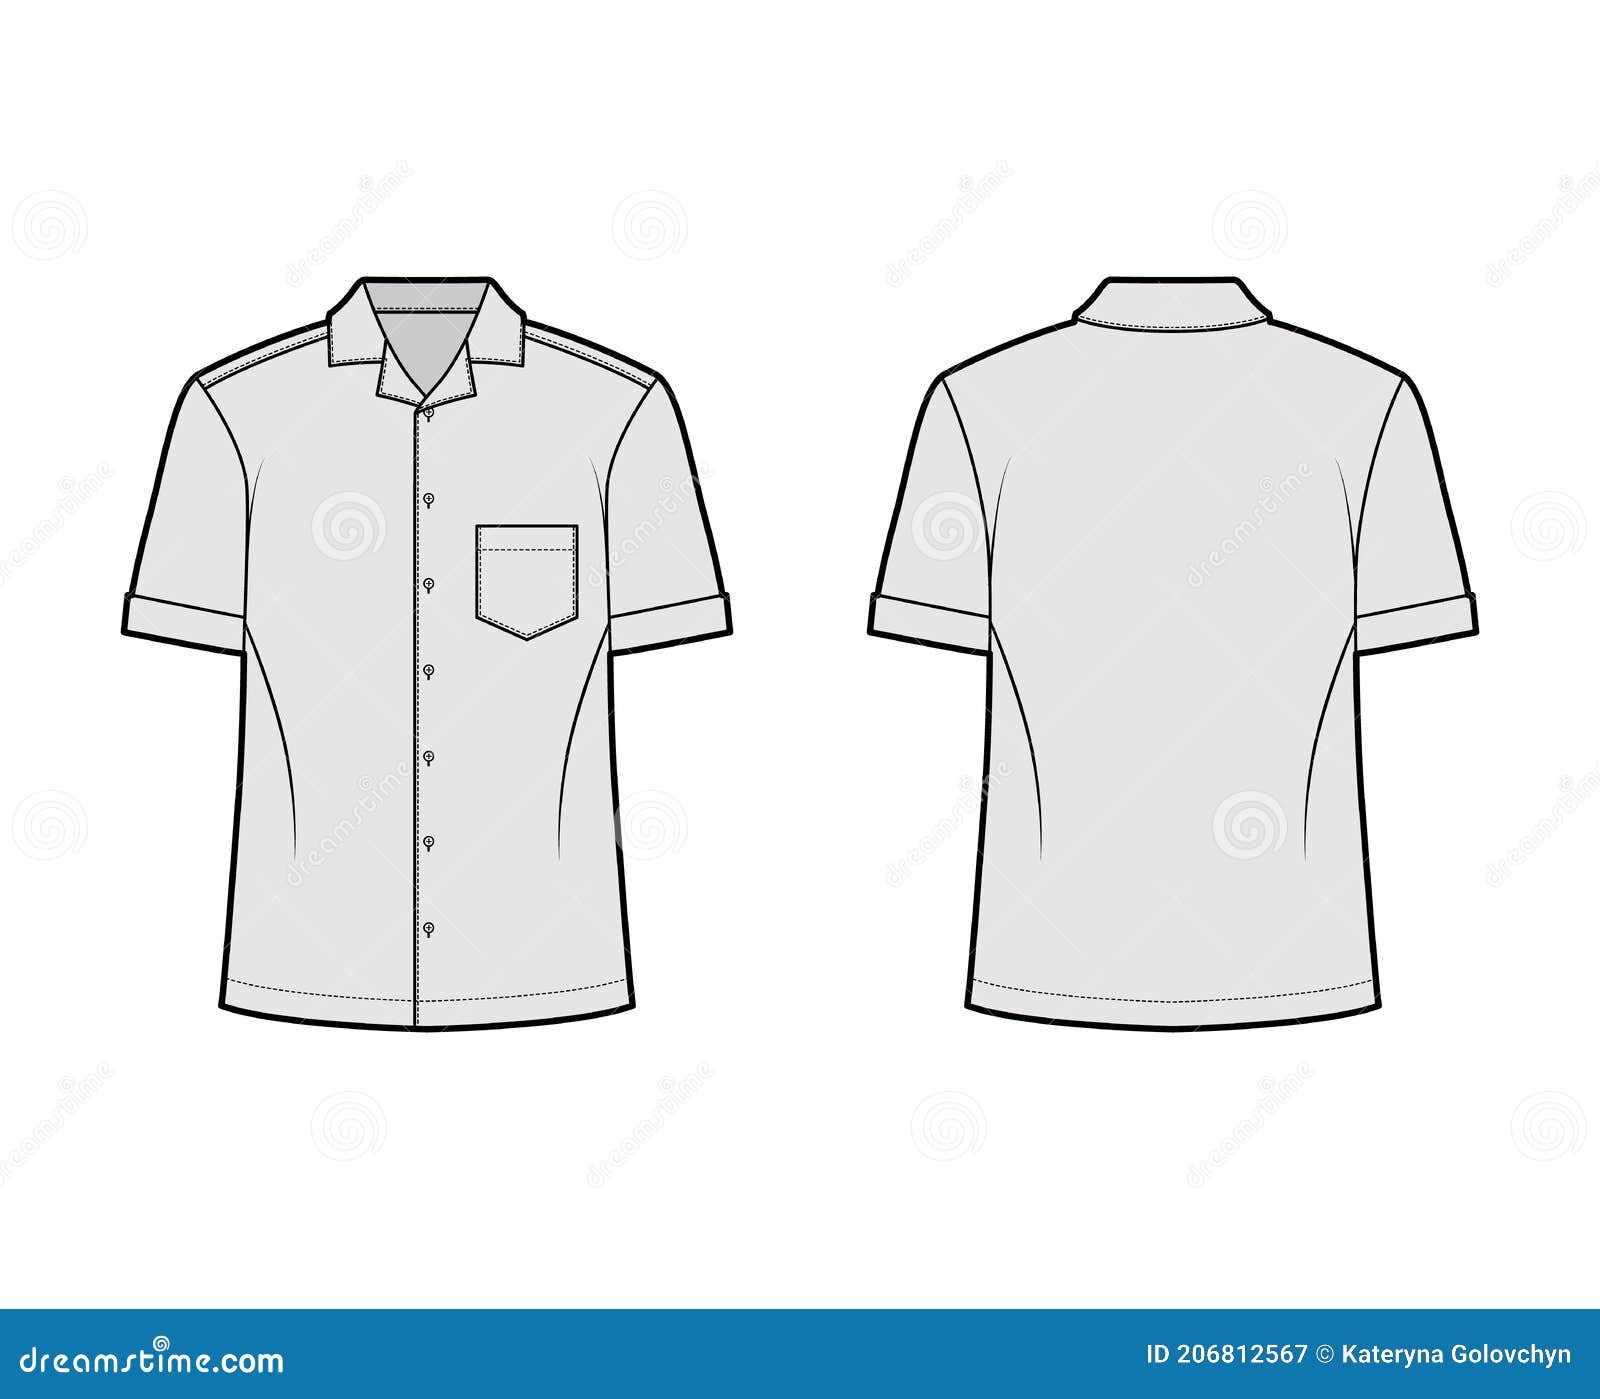 Shirt Camp Technical Fashion Illustration with Short Sleeves, Angled ...